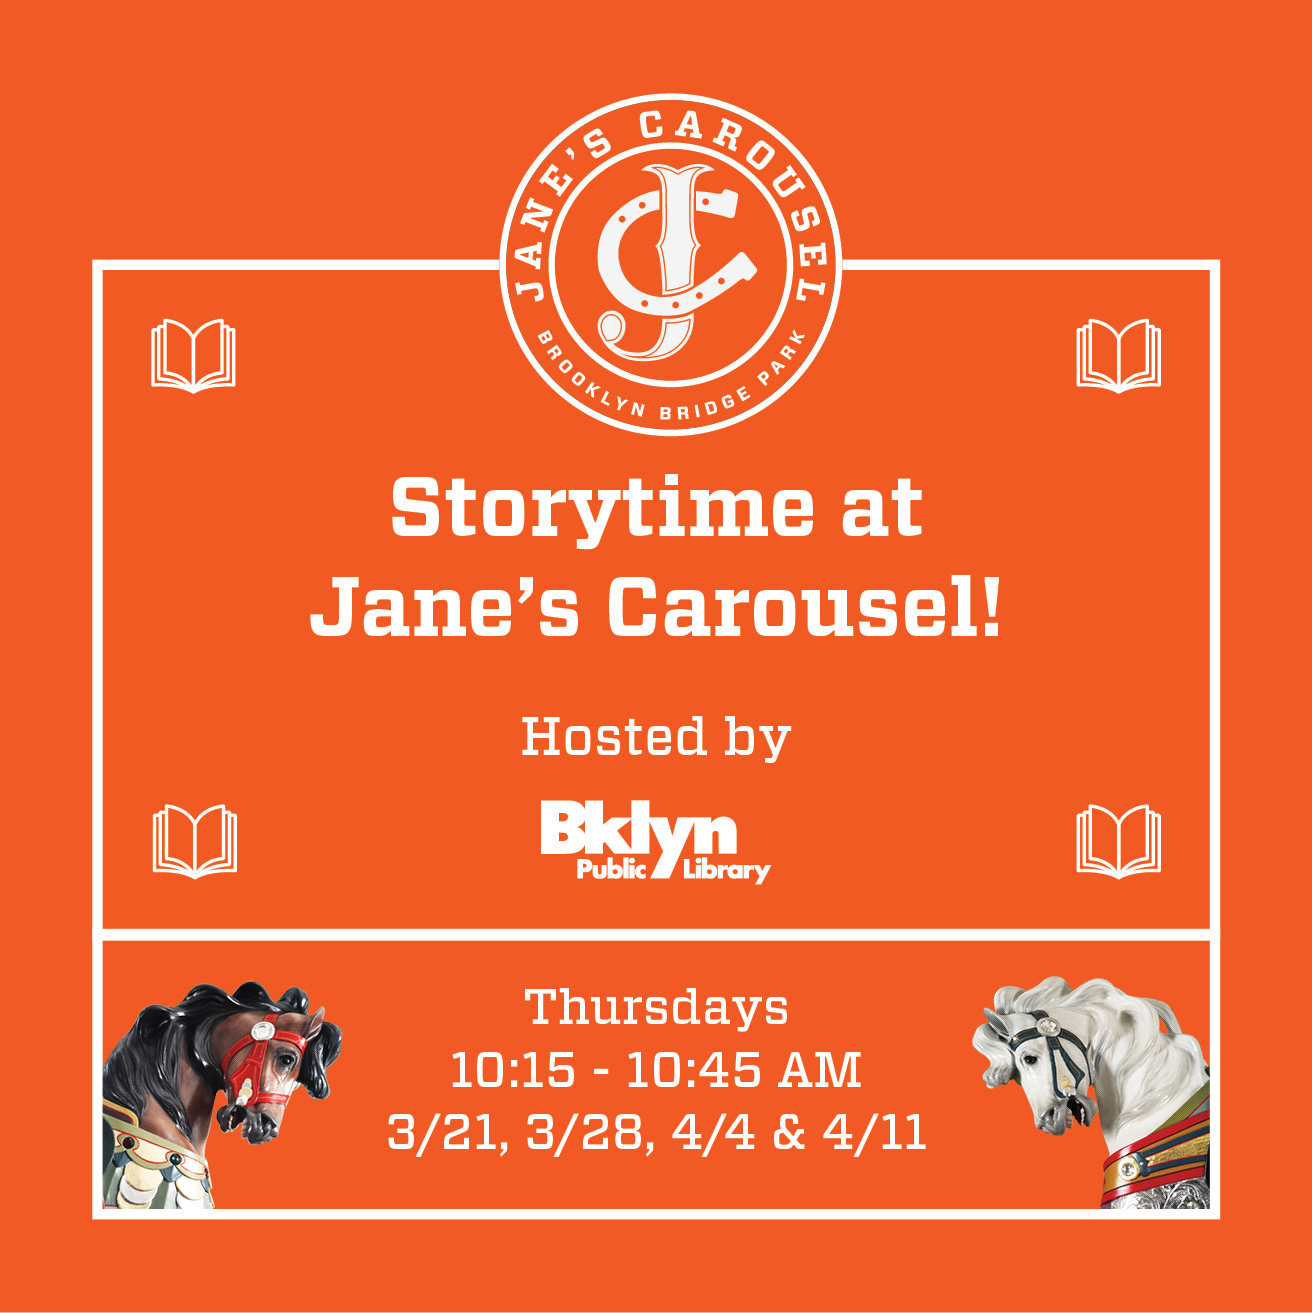 Storytime at Jane's Carousel! Hosted by Brooklyn Public Library. Thursdays 10:15-10:45am, 3/21, 3/28, 4/4 & 4/11